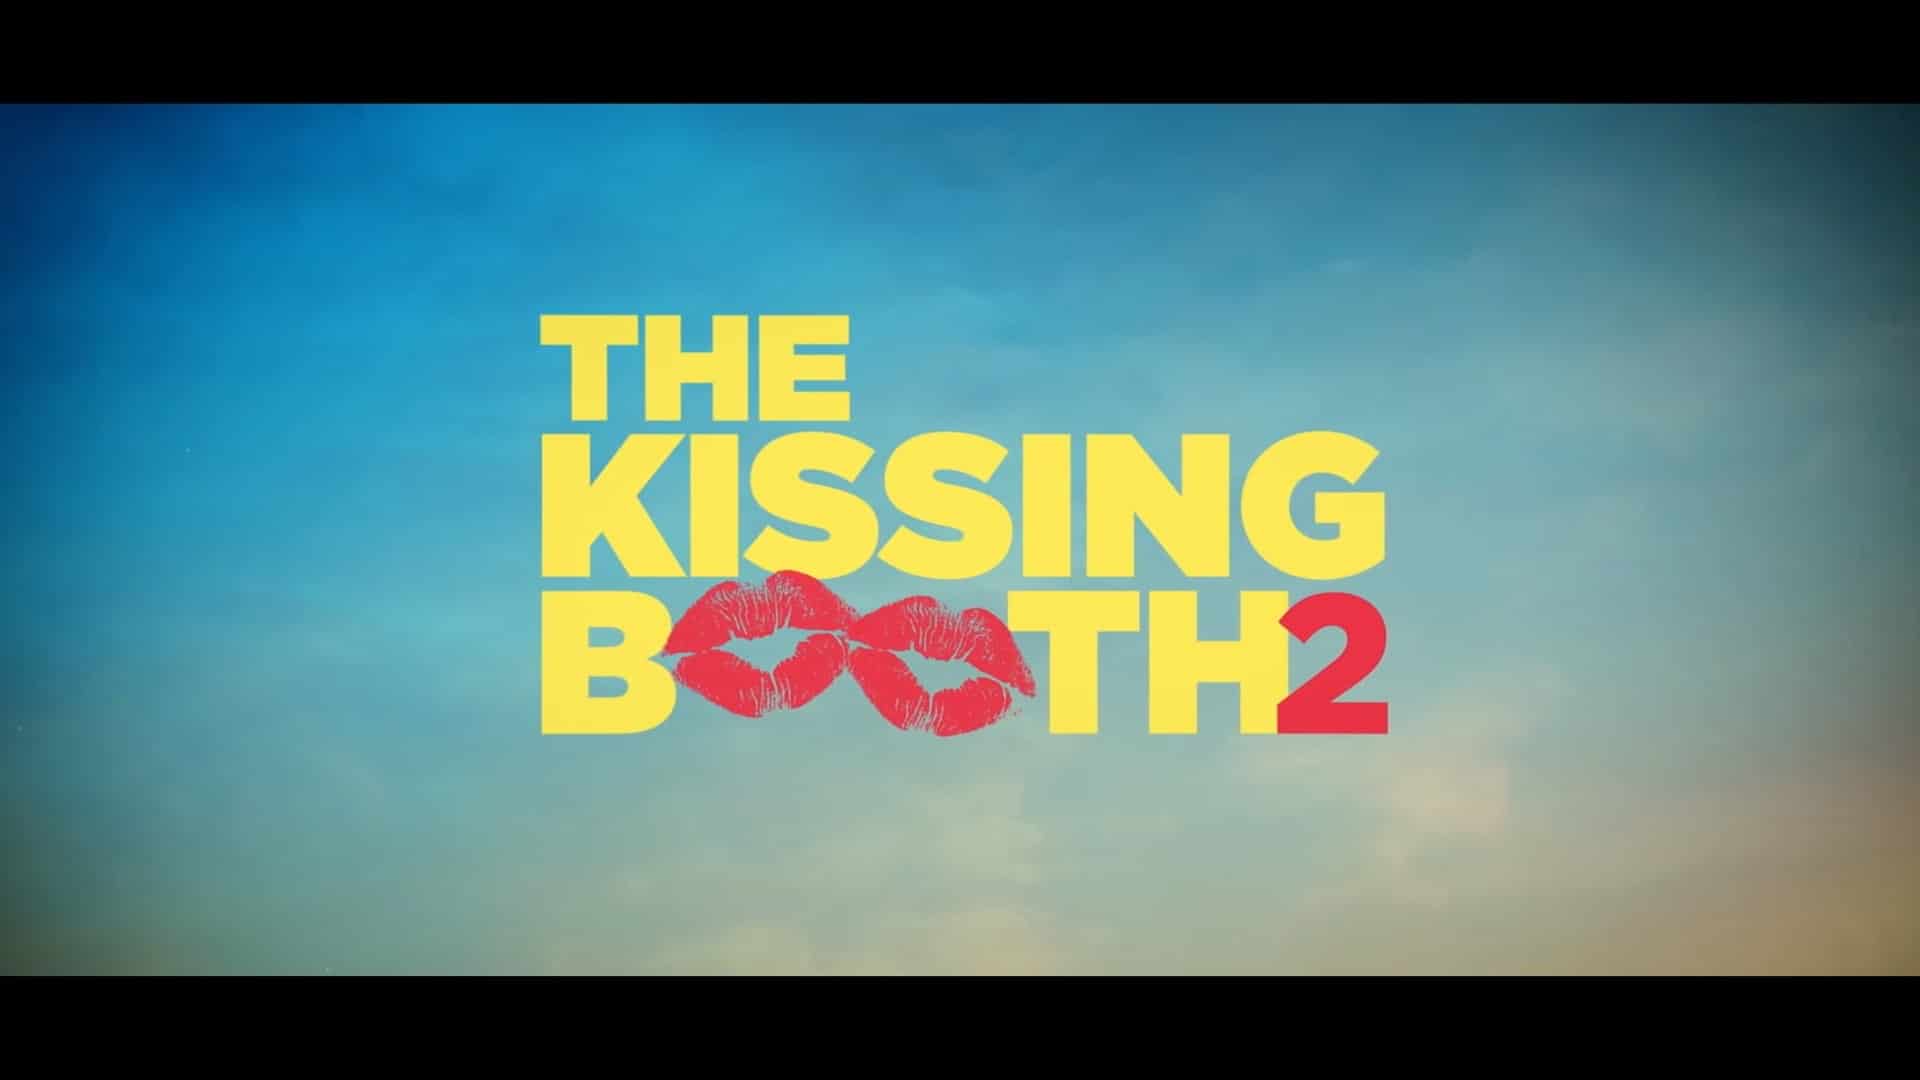 Netflix The Kissing Booth 2 Trailer, Netflix Romantic Comedy Movies, Netflix Teen Movies, Coming to Netflix in July 2020